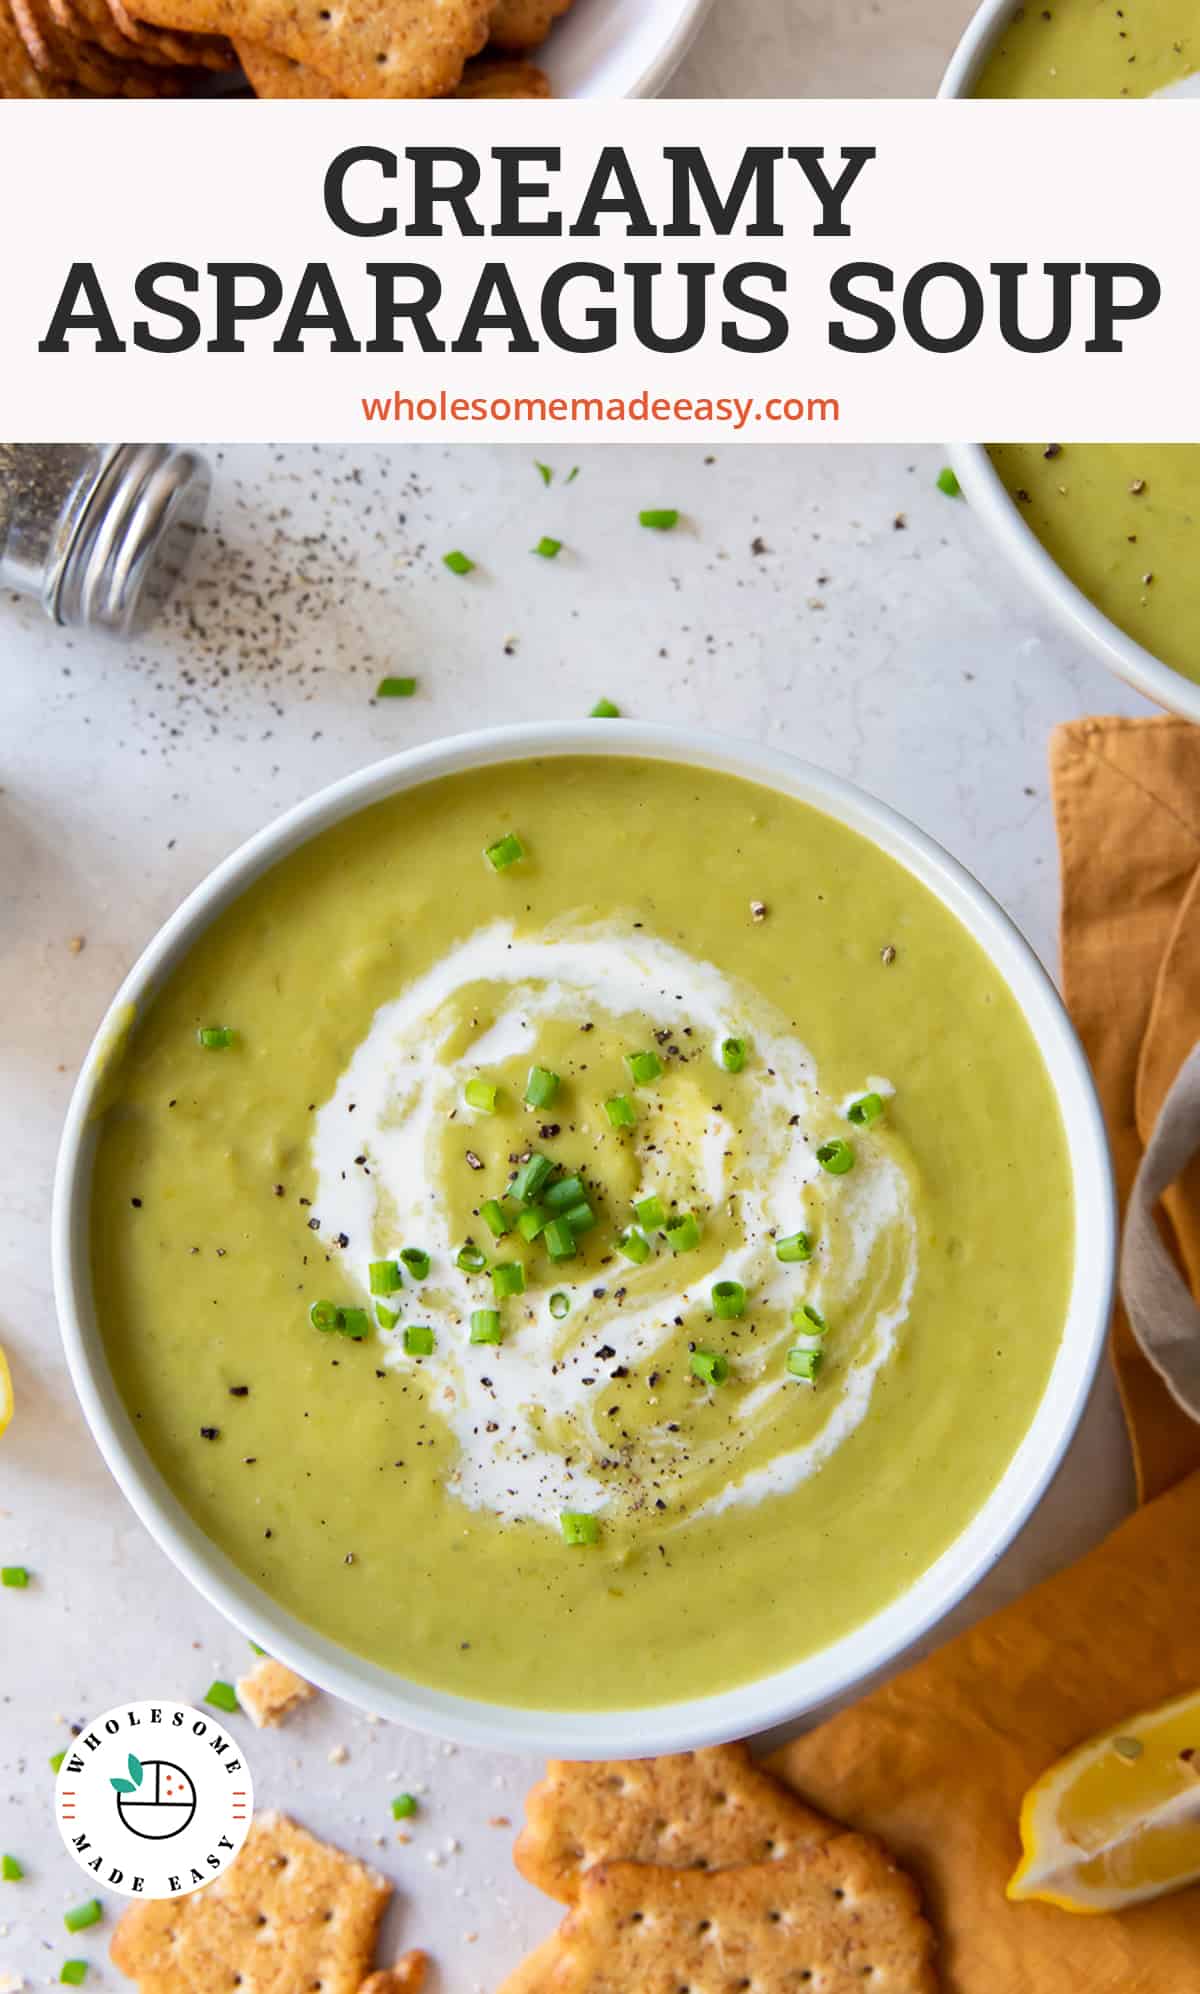 Two bowls of Asparagus Soup with crackers around them with text overlay.